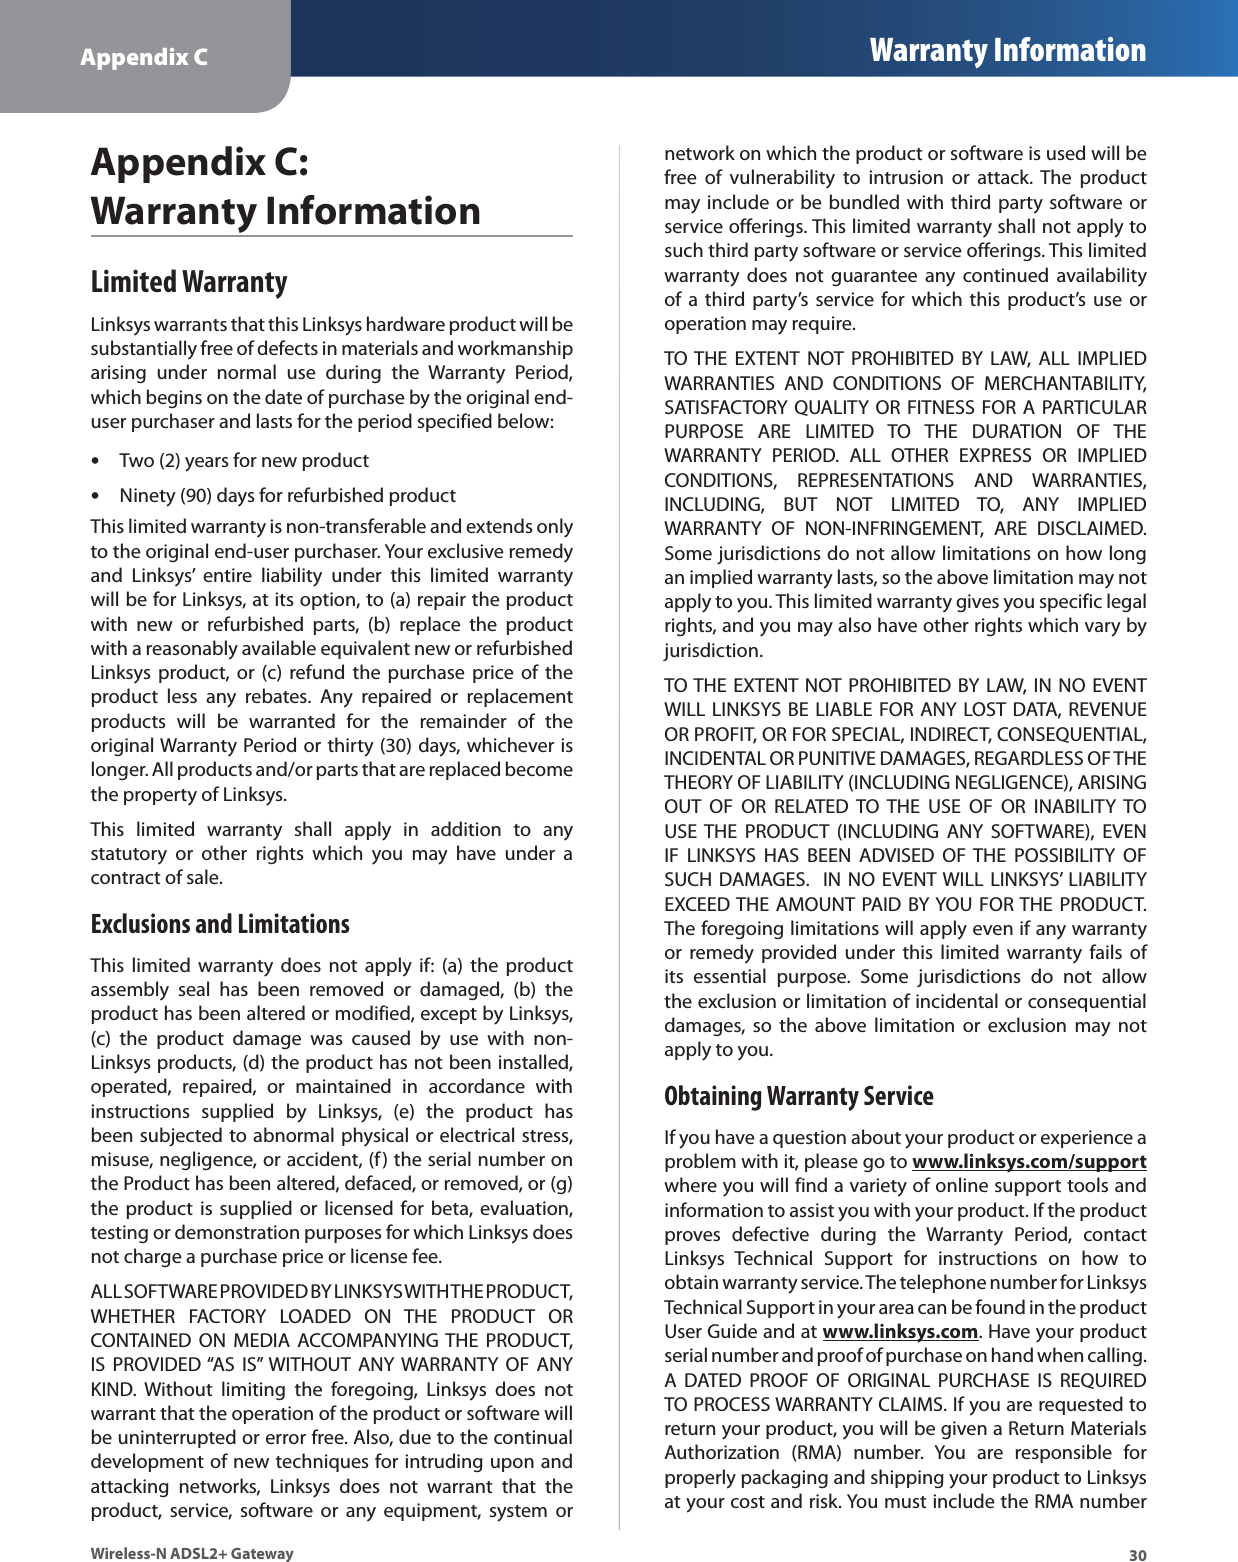 Appendix C Warranty Information30Wireless-N ADSL2+ GatewayAppendix C:  Warranty InformationLimited WarrantyLinksys warrants that this Linksys hardware product will be substantially free of defects in materials and workmanship arising under normal use during the Warranty Period, which begins on the date of purchase by the original end-user purchaser and lasts for the period specified below:Two (2) years for new productsNinety (90) days for refurbished productsThis limited warranty is non-transferable and extends only to the original end-user purchaser. Your exclusive remedy and Linksys’ entire liability under this limited warranty will be for Linksys, at its option, to (a) repair the product with new or refurbished parts, (b) replace the product with a reasonably available equivalent new or refurbished Linksys product, or (c) refund the purchase price of the product less any rebates. Any repaired or replacement products will be warranted for the remainder of the original Warranty Period or thirty (30) days, whichever is longer. All products and/or parts that are replaced become the property of Linksys.This limited warranty shall apply in addition to any statutory or other rights which you may have under a contract of sale.Exclusions and Limitations  This limited warranty does not apply if: (a) the product assembly seal has been removed or damaged, (b) the product has been altered or modified, except by Linksys, (c) the product damage was caused by use with non-Linksys products, (d) the product has not been installed, operated, repaired, or maintained in accordance with instructions supplied by Linksys, (e) the product has been subjected to abnormal physical or electrical stress, misuse, negligence, or accident, (f) the serial number on the Product has been altered, defaced, or removed, or (g) the product is supplied or licensed for beta, evaluation, testing or demonstration purposes for which Linksys does not charge a purchase price or license fee.ALL SOFTWARE PROVIDED BY LINKSYS WITH THE PRODUCT, WHETHER FACTORY LOADED ON THE PRODUCT OR CONTAINED ON MEDIA ACCOMPANYING THE PRODUCT, IS PROVIDED “AS IS” WITHOUT ANY WARRANTY OF ANY KIND. Without limiting the foregoing, Linksys does not warrant that the operation of the product or software will be uninterrupted or error free. Also, due to the continual development of new techniques for intruding upon and attacking networks, Linksys does not warrant that the product, service, software or any equipment, system or network on which the product or software is used will be free of vulnerability to intrusion or attack. The product may include or be bundled with third party software or service offerings. This limited warranty shall not apply to such third party software or service offerings. This limited warranty does not guarantee any continued availability of a third party’s service for which this product’s use or operation may require. TO THE EXTENT NOT PROHIBITED BY LAW, ALL IMPLIED WARRANTIES AND CONDITIONS OF MERCHANTABILITY, SATISFACTORY QUALITY OR FITNESS FOR A PARTICULAR PURPOSE ARE LIMITED TO THE DURATION OF THE WARRANTY PERIOD. ALL OTHER EXPRESS OR IMPLIED CONDITIONS, REPRESENTATIONS AND WARRANTIES, INCLUDING, BUT NOT LIMITED TO, ANY IMPLIED WARRANTY OF NON-INFRINGEMENT, ARE DISCLAIMED. Some jurisdictions do not allow limitations on how long an implied warranty lasts, so the above limitation may not apply to you. This limited warranty gives you specific legal rights, and you may also have other rights which vary by jurisdiction.TO THE EXTENT NOT PROHIBITED BY LAW, IN NO EVENT WILL LINKSYS BE LIABLE FOR ANY LOST DATA, REVENUE OR PROFIT, OR FOR SPECIAL, INDIRECT, CONSEQUENTIAL, INCIDENTAL OR PUNITIVE DAMAGES, REGARDLESS OF THE THEORY OF LIABILITY (INCLUDING NEGLIGENCE), ARISING OUT OF OR RELATED TO THE USE OF OR INABILITY TO USE THE PRODUCT (INCLUDING ANY SOFTWARE), EVEN IF LINKSYS HAS BEEN ADVISED OF THE POSSIBILITY OF SUCH DAMAGES.  IN NO EVENT WILL LINKSYS’ LIABILITY EXCEED THE AMOUNT PAID BY YOU FOR THE PRODUCT. The foregoing limitations will apply even if any warranty or remedy provided under this limited warranty fails of its essential purpose. Some jurisdictions do not allow the exclusion or limitation of incidental or consequential damages, so the above limitation or exclusion may not apply to you.Obtaining Warranty ServiceIf you have a question about your product or experience a problem with it, please go to www.linksys.com/supportwhere you will find a variety of online support tools and information to assist you with your product. If the product proves defective during the Warranty Period, contact Linksys Technical Support for instructions on how to obtain warranty service. The telephone number for Linksys Technical Support in your area can be found in the product User Guide and at www.linksys.com. Have your product serial number and proof of purchase on hand when calling. A DATED PROOF OF ORIGINAL PURCHASE IS REQUIRED TO PROCESS WARRANTY CLAIMS. If you are requested to return your product, you will be given a Return Materials Authorization (RMA) number. You are responsible for properly packaging and shipping your product to Linksys at your cost and risk. You must include the RMA number 